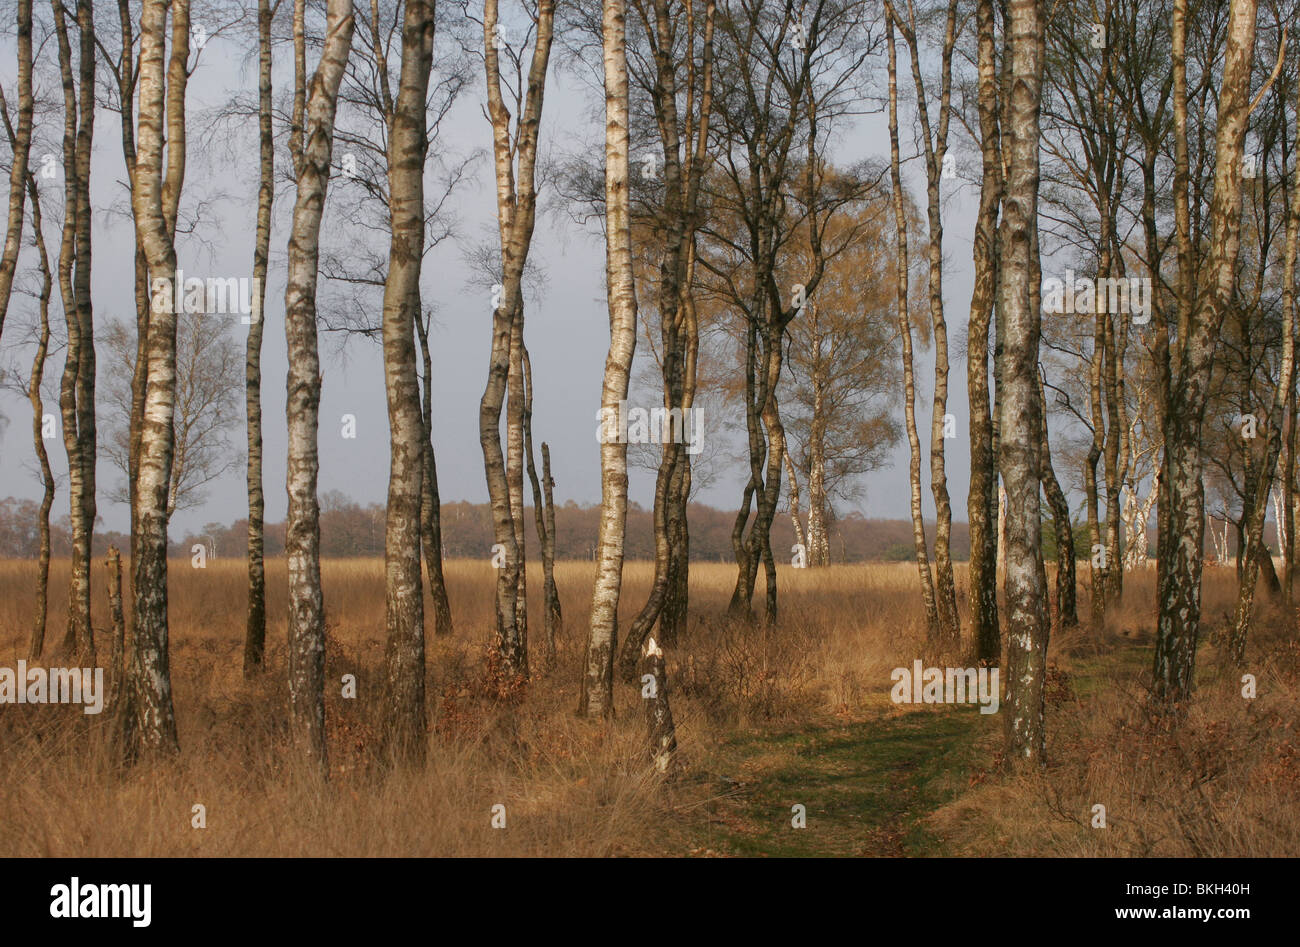 Group of birches at Deelense veld in the spring Stock Photo